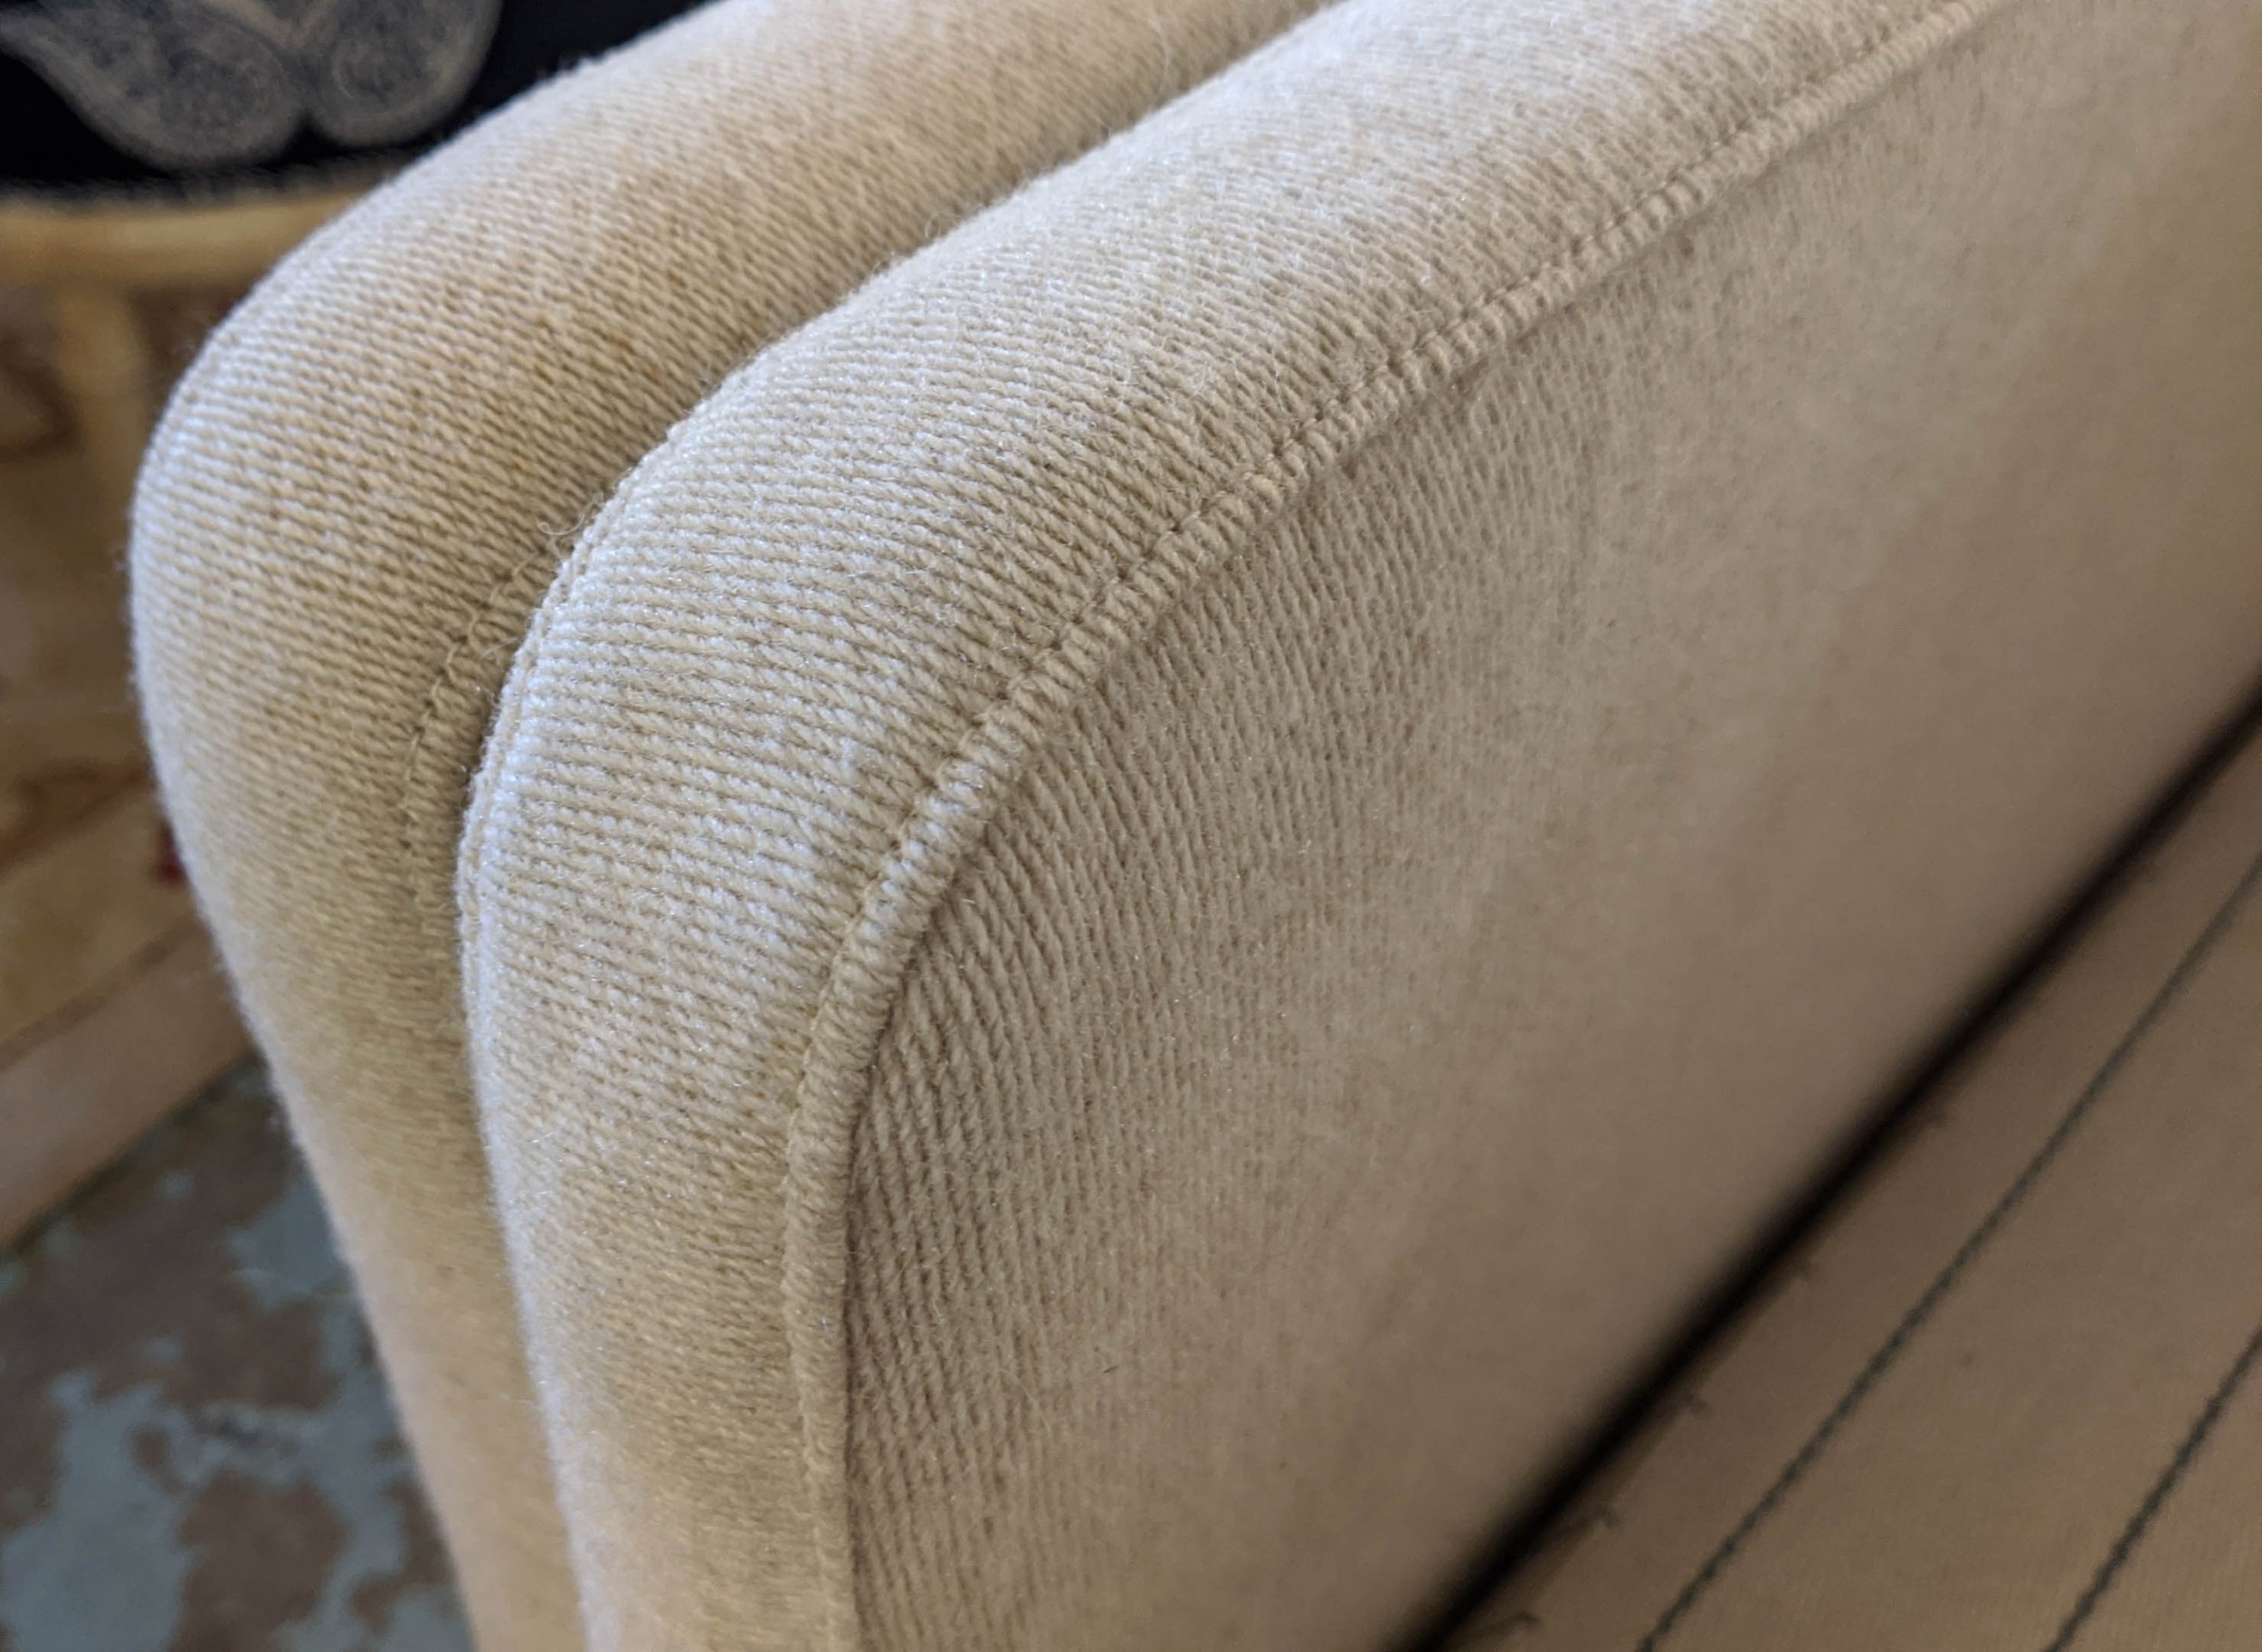 SOFA, 224cm striped upholstery. (fabric needs cleaning) - Image 4 of 4